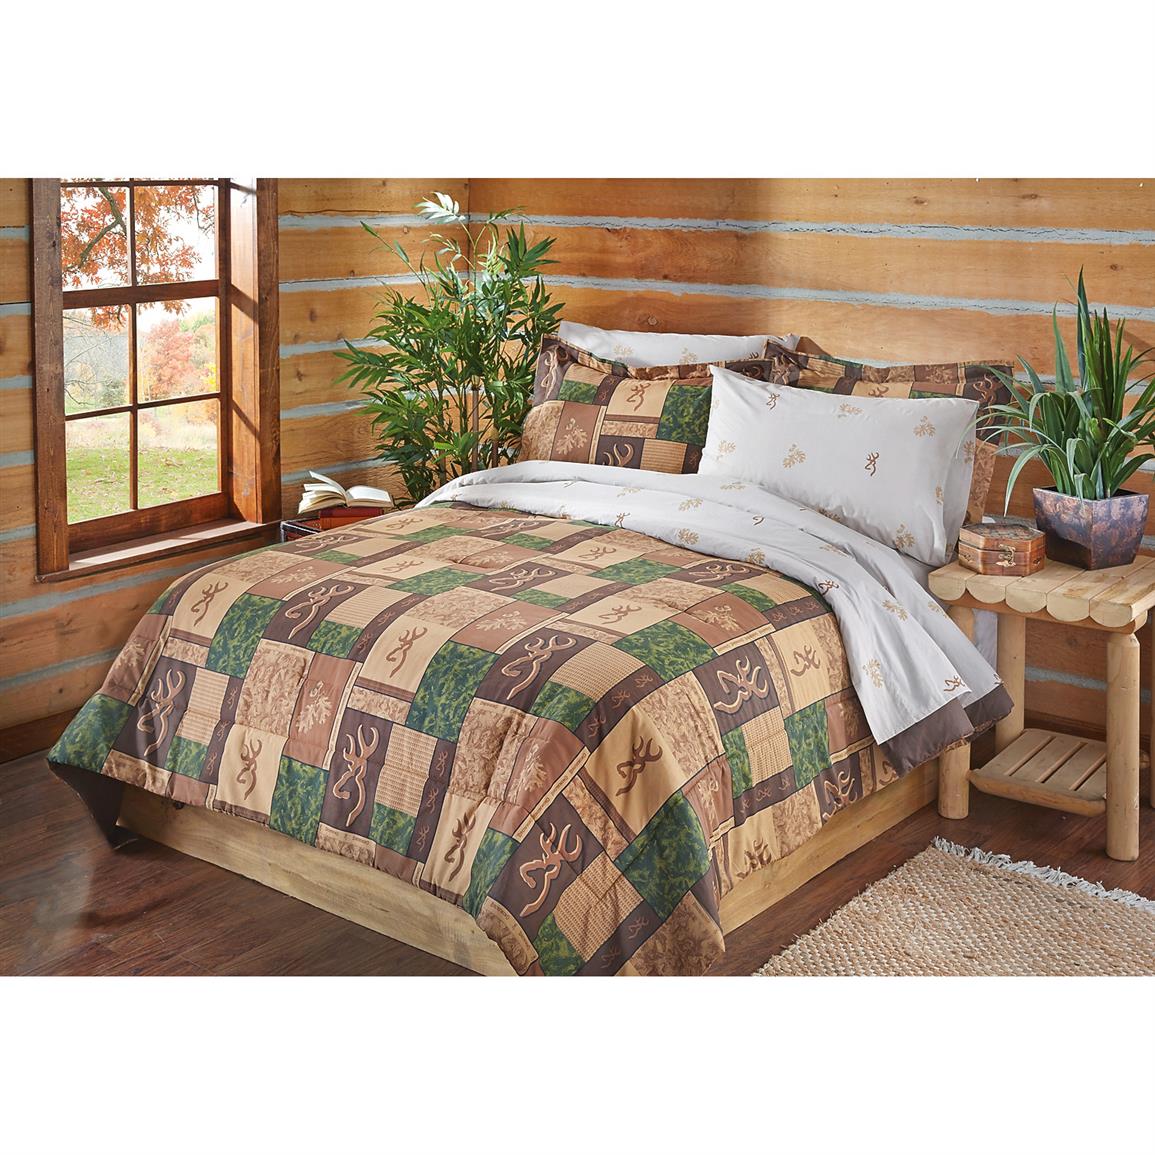 Browning Patchwork Bed Set 653836, Browning Bedding King Size